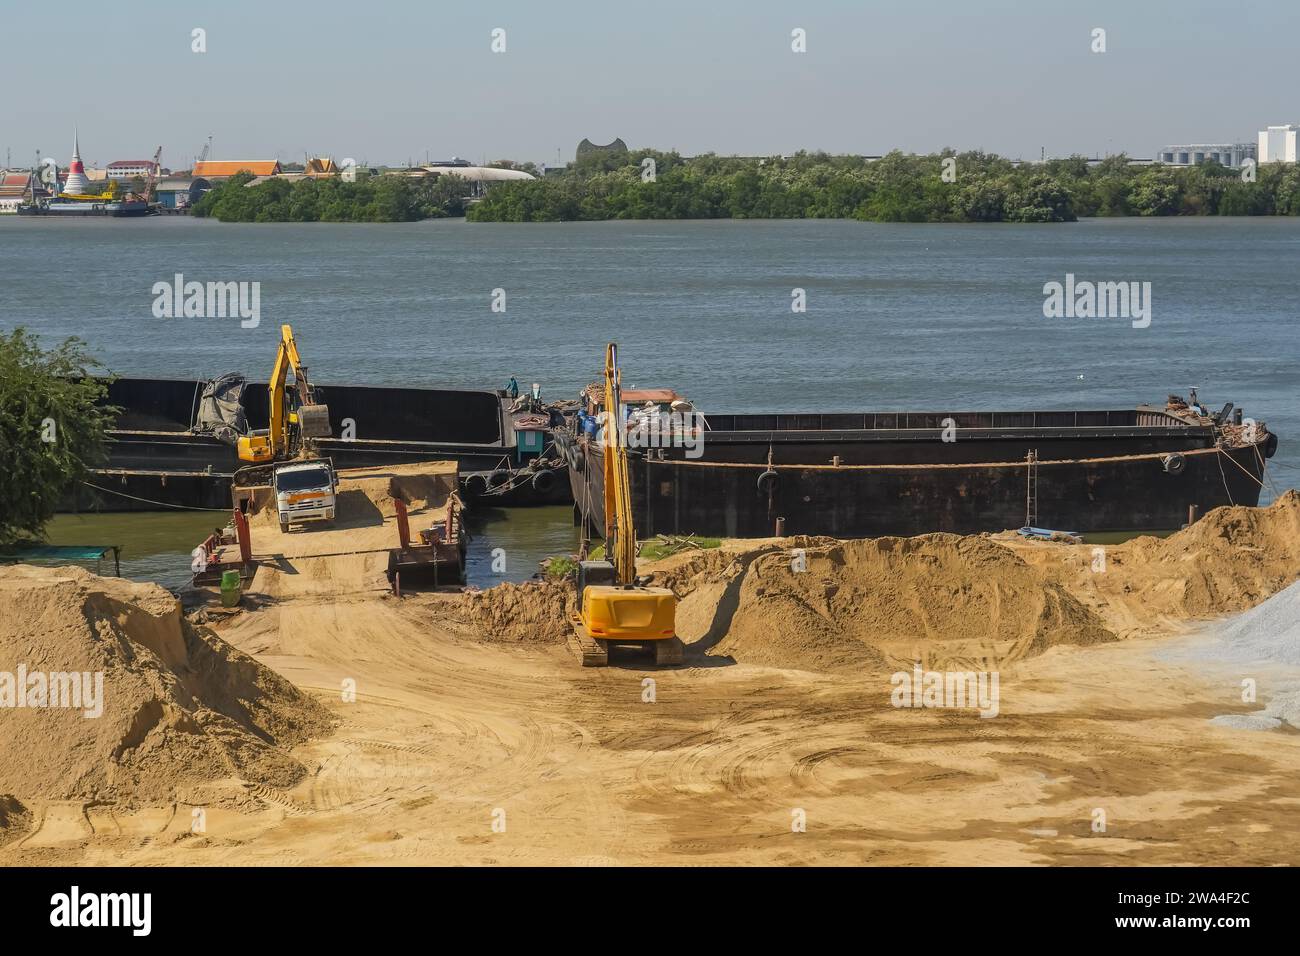 An excavator is loaded into a river vessel barges sand soil transportation of construction materials and materials along the river Stock Photo